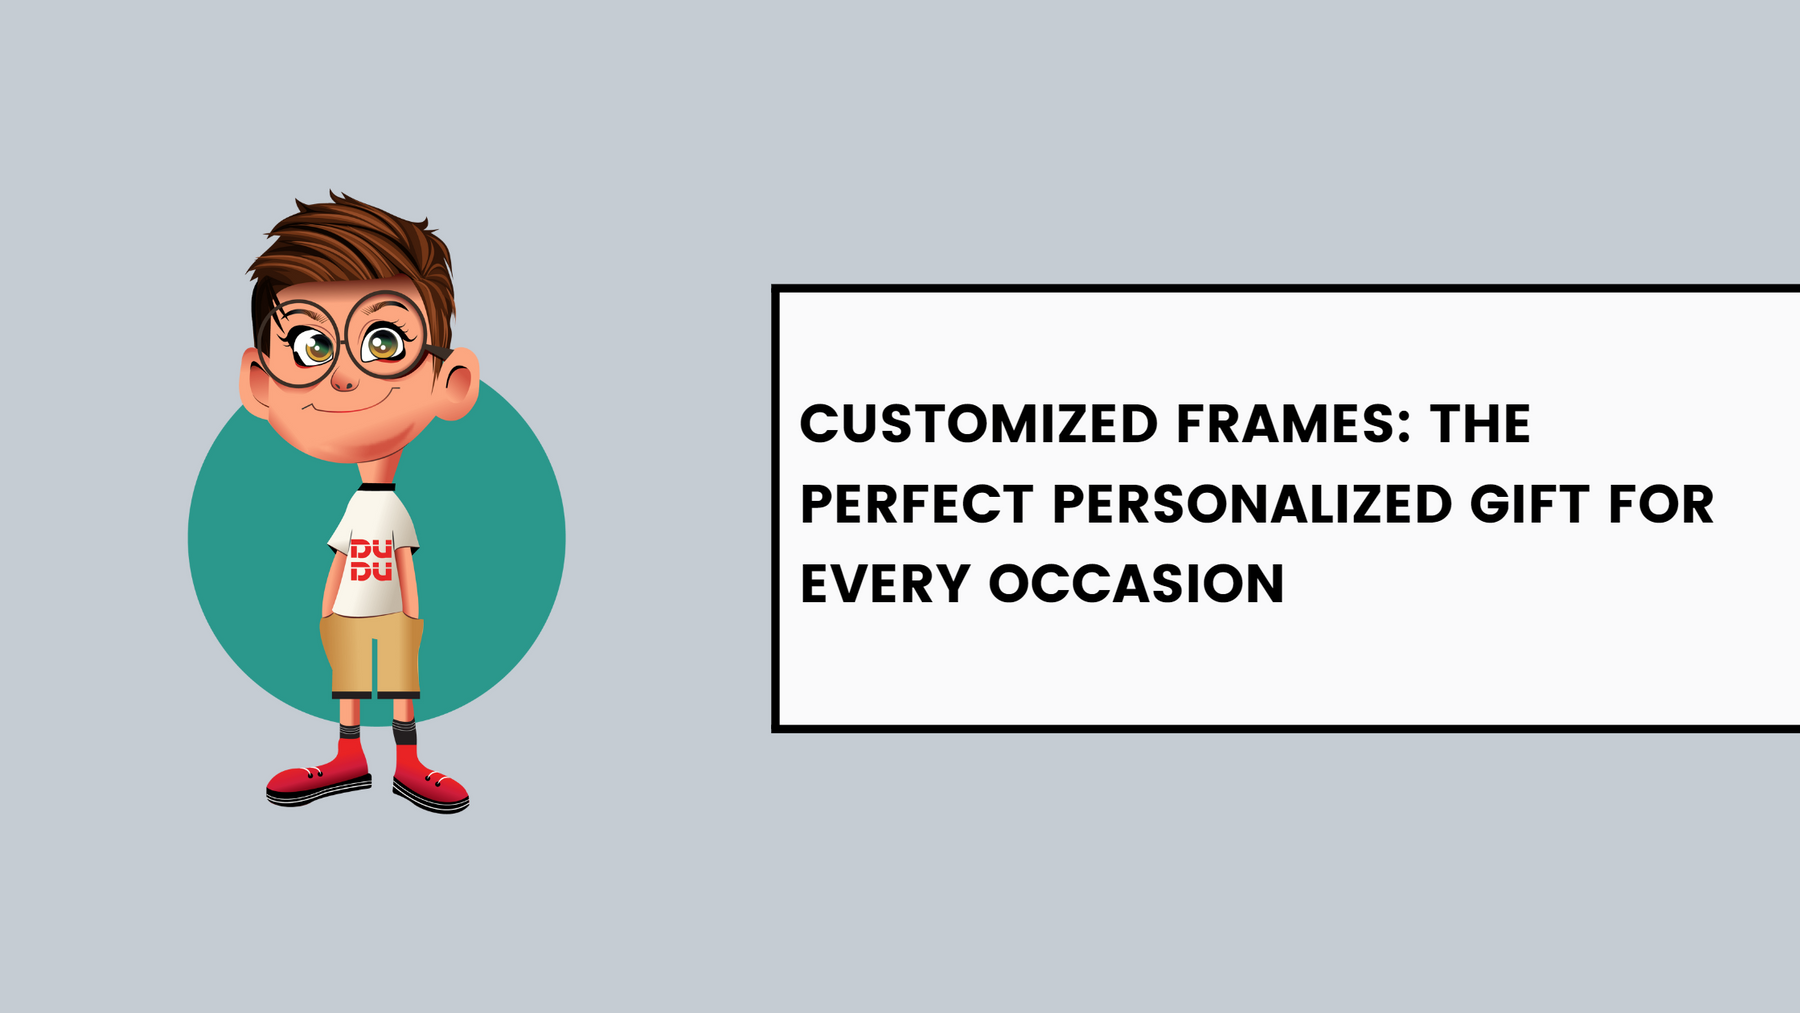 Customized Frames: The Perfect Personalized Gift for Every Occasion